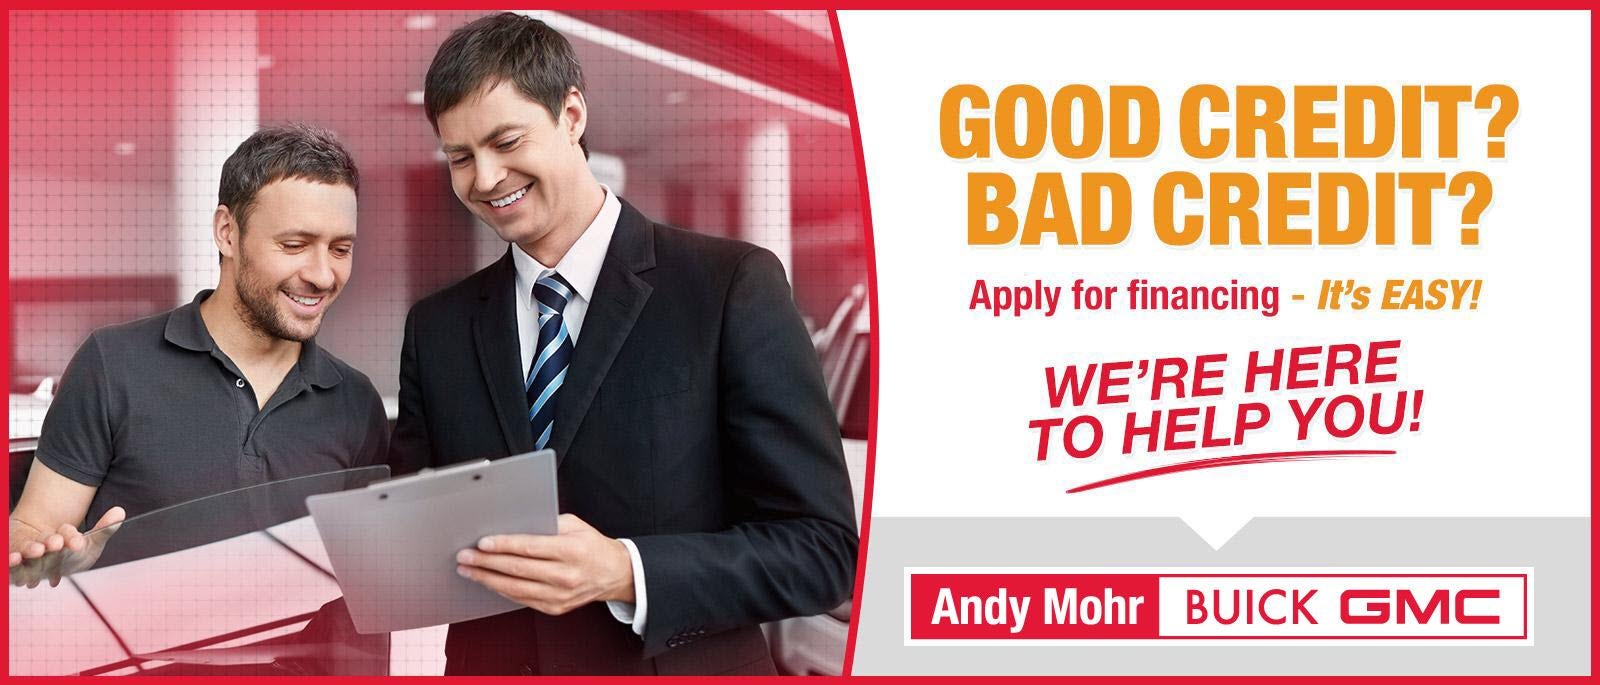 Apply for financing at Andy Mohr Buick GMC